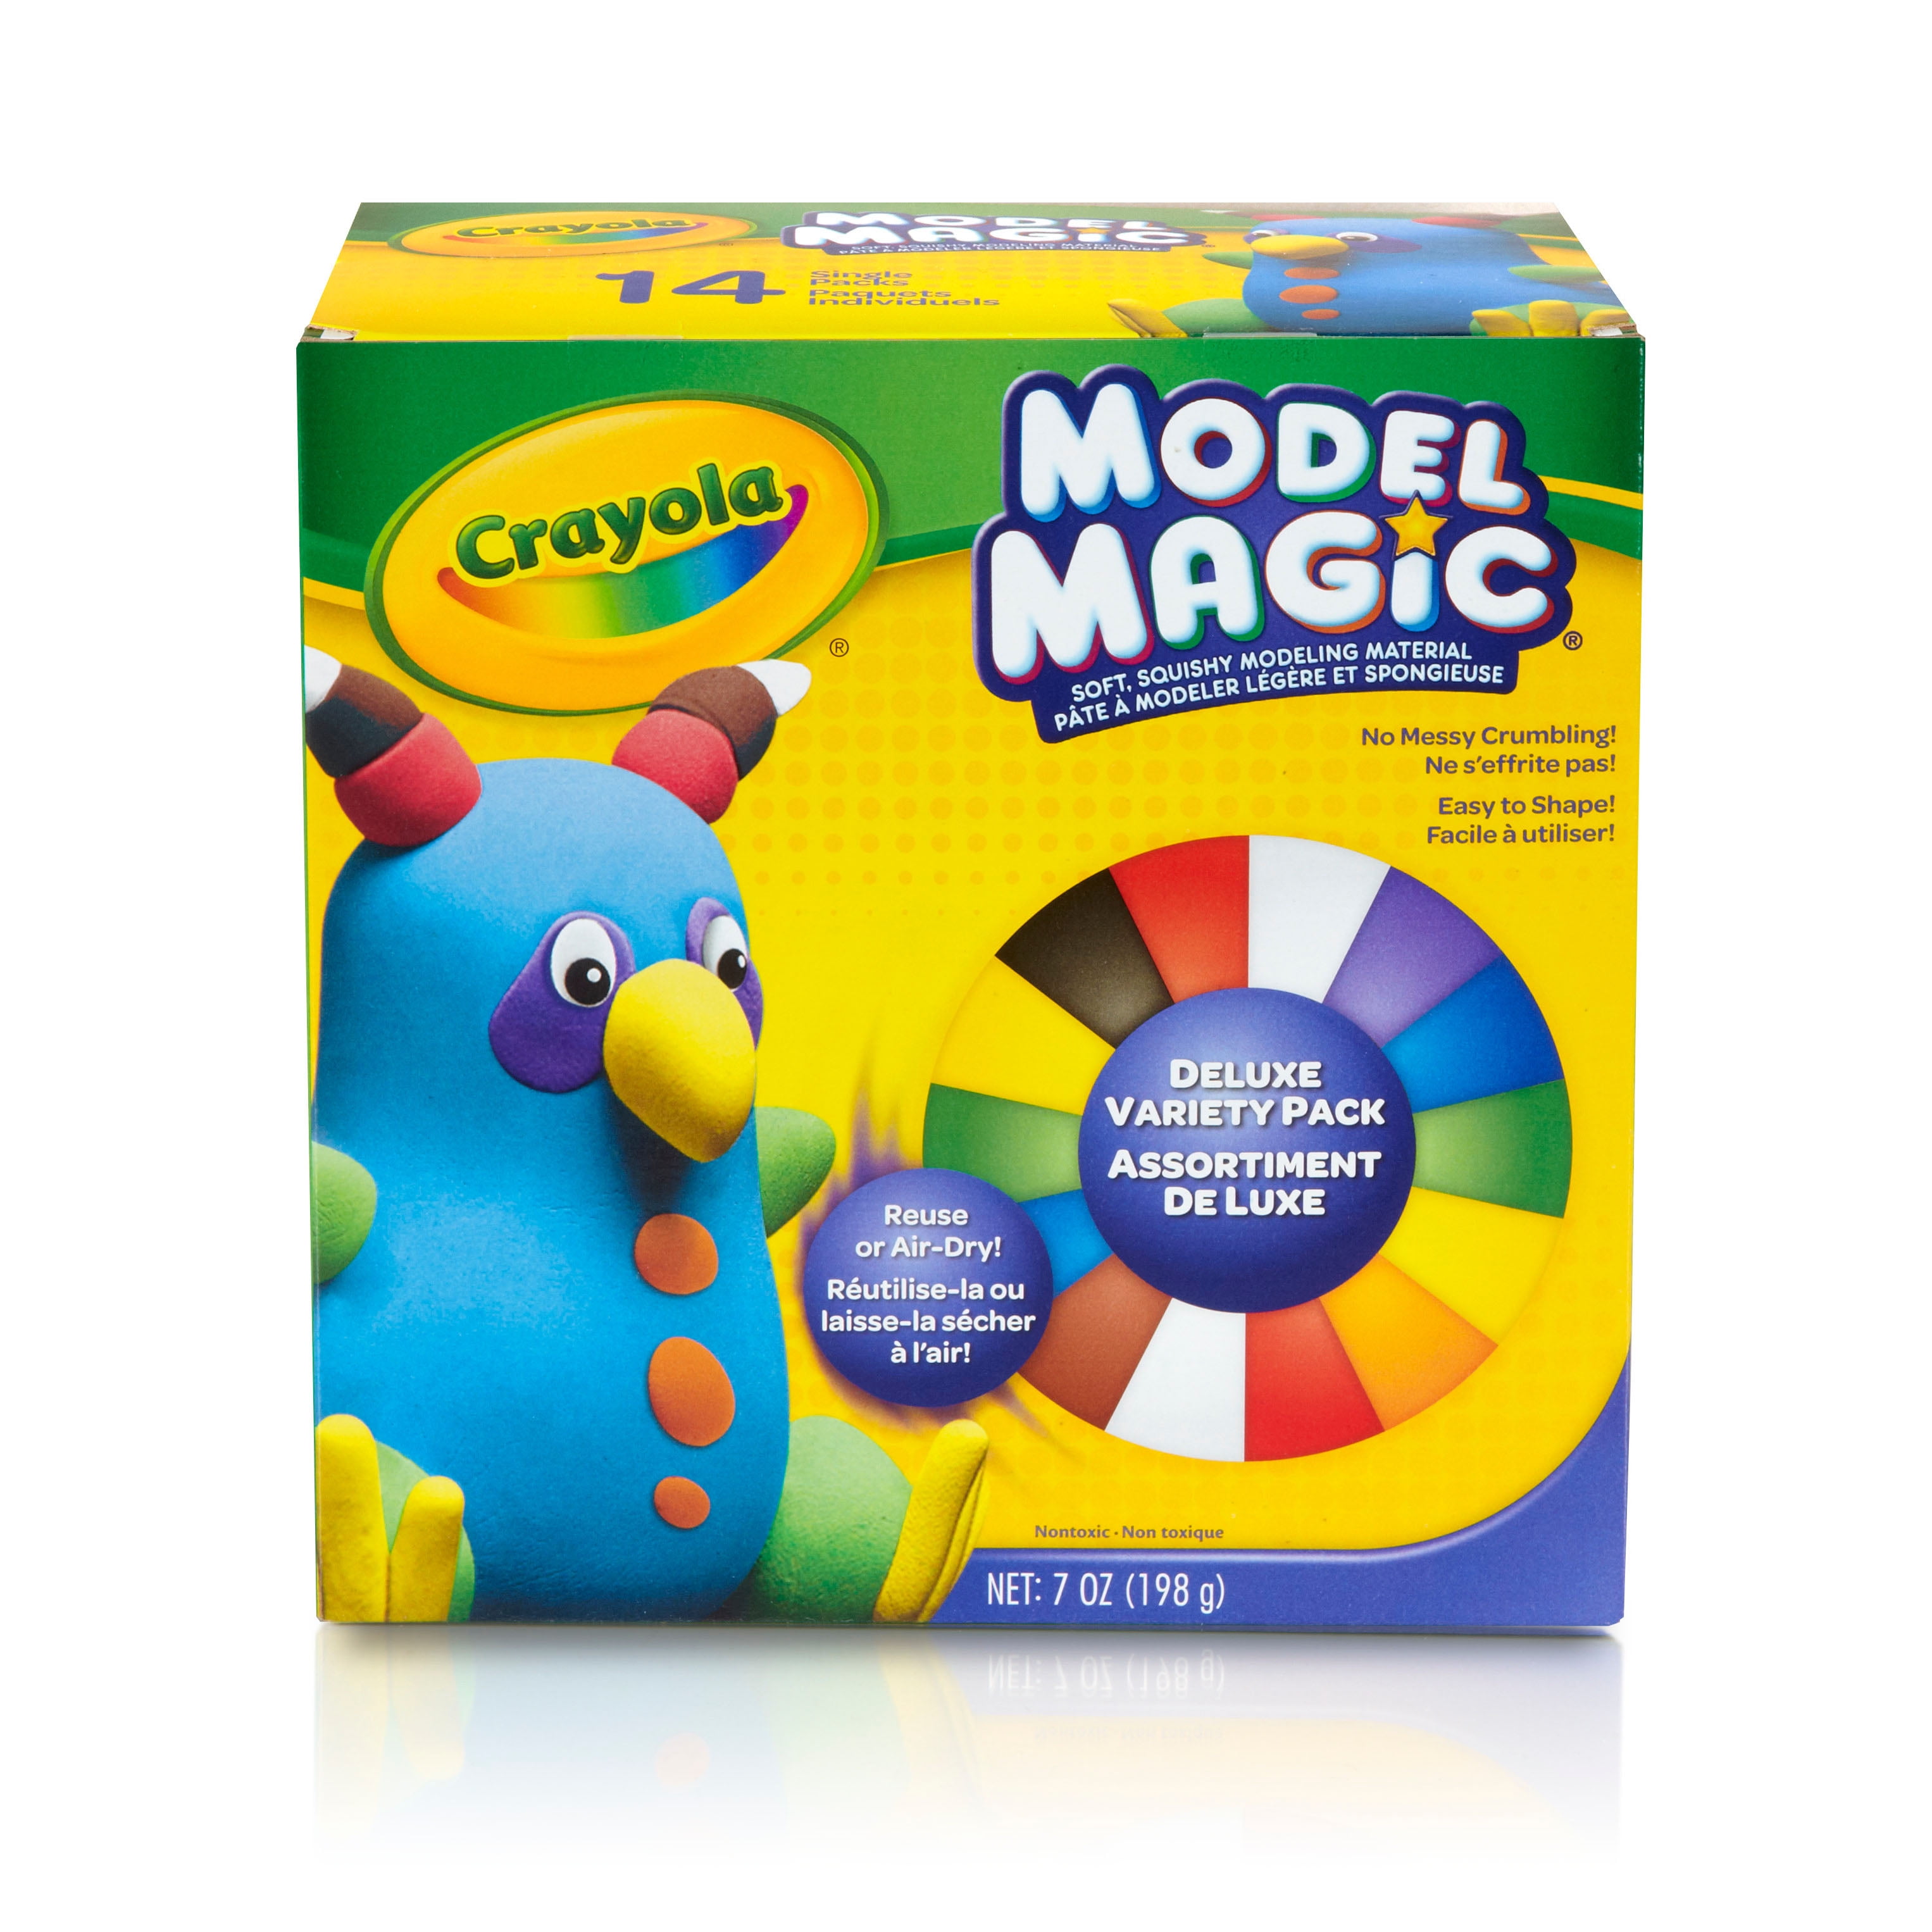 Crayola Modeling Clay Assortment Cyo570300 for sale online 